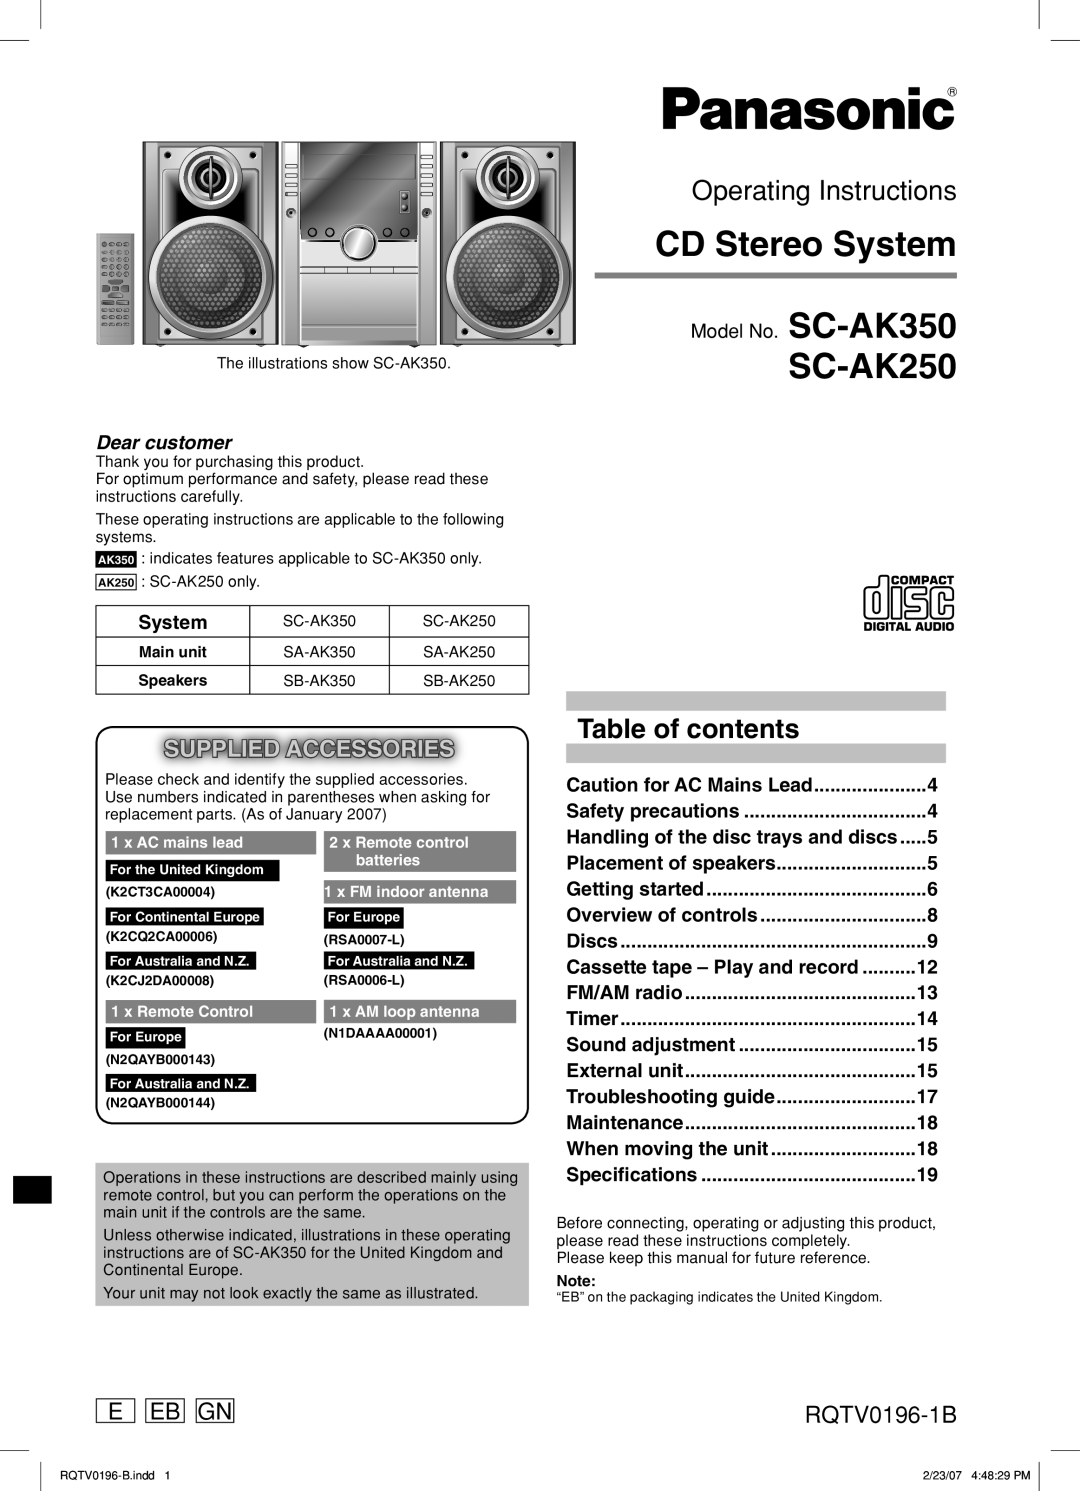 Panasonic SC-AK350 operating instructions E Eb Gn, RQTV0196-1B, System, Handling of the disc trays and discs, SC-AK250 